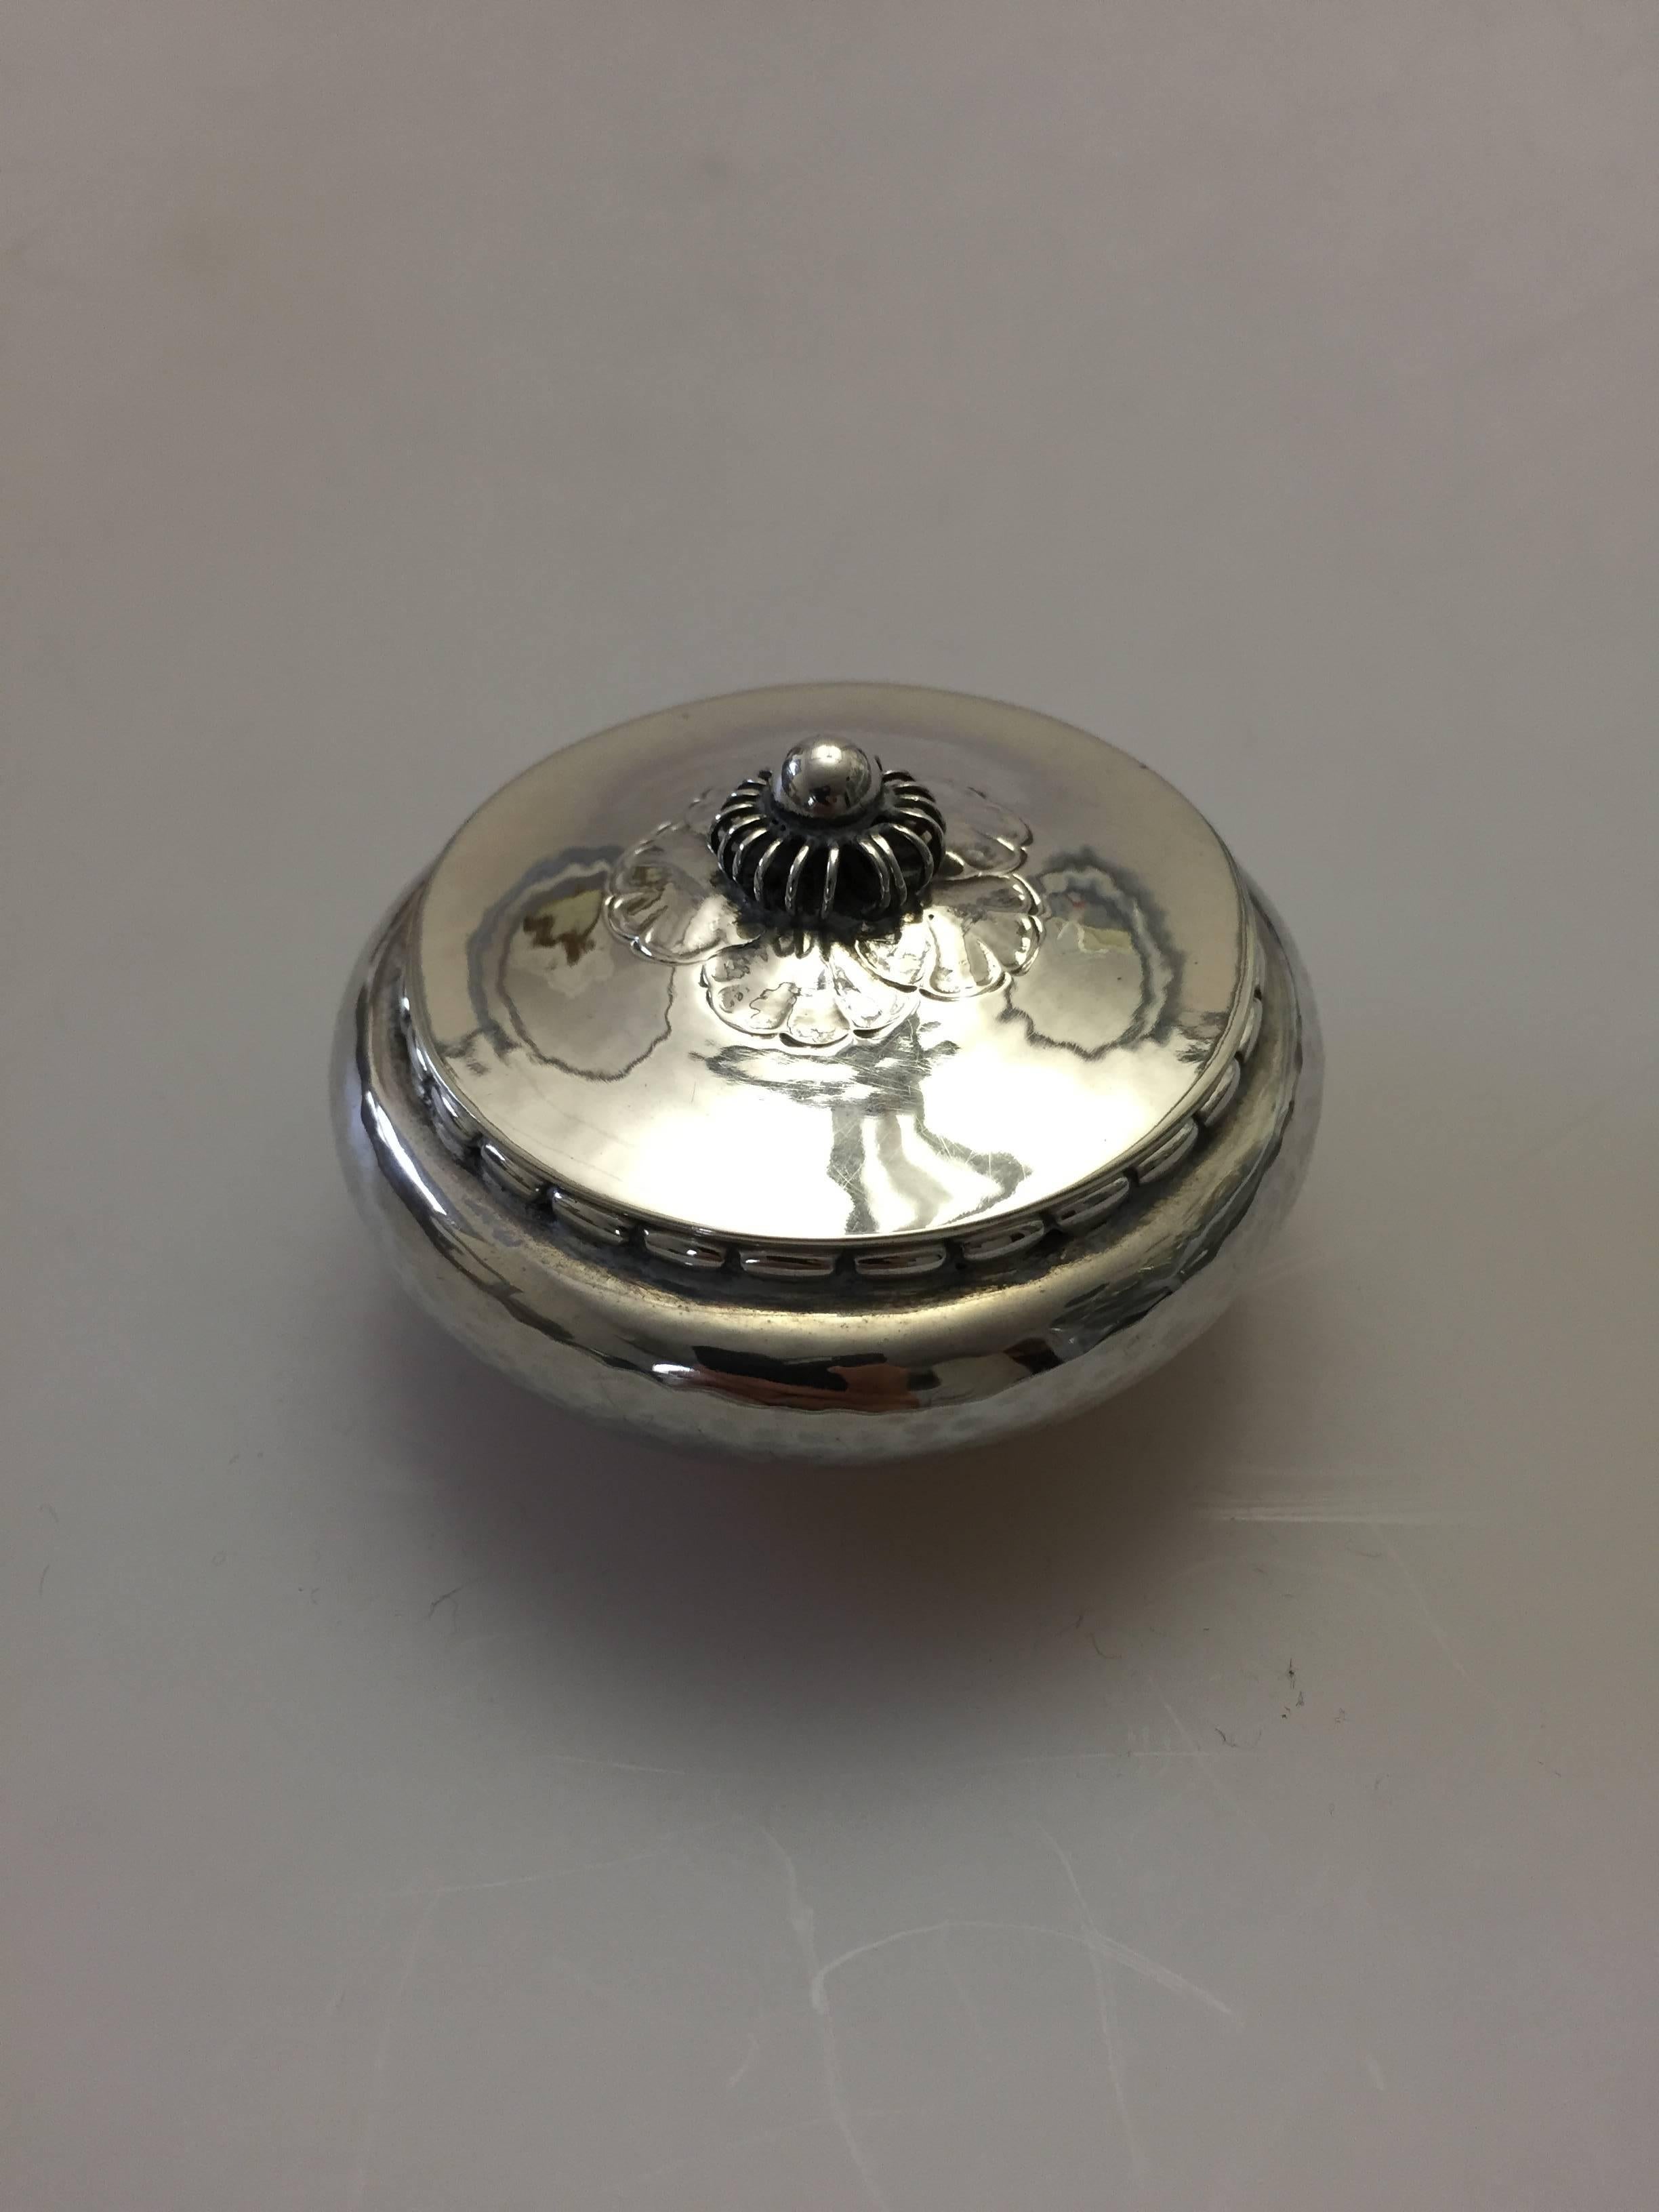 Georg Jensen sterling silver pill box with round curved bottom. Is in perfect condition.

Georg Jensen (1866-1935) opened his small silver atelier in Copenhagen, Denmark in 1904. By 1935 the year of his death, he had received world acclaim and was